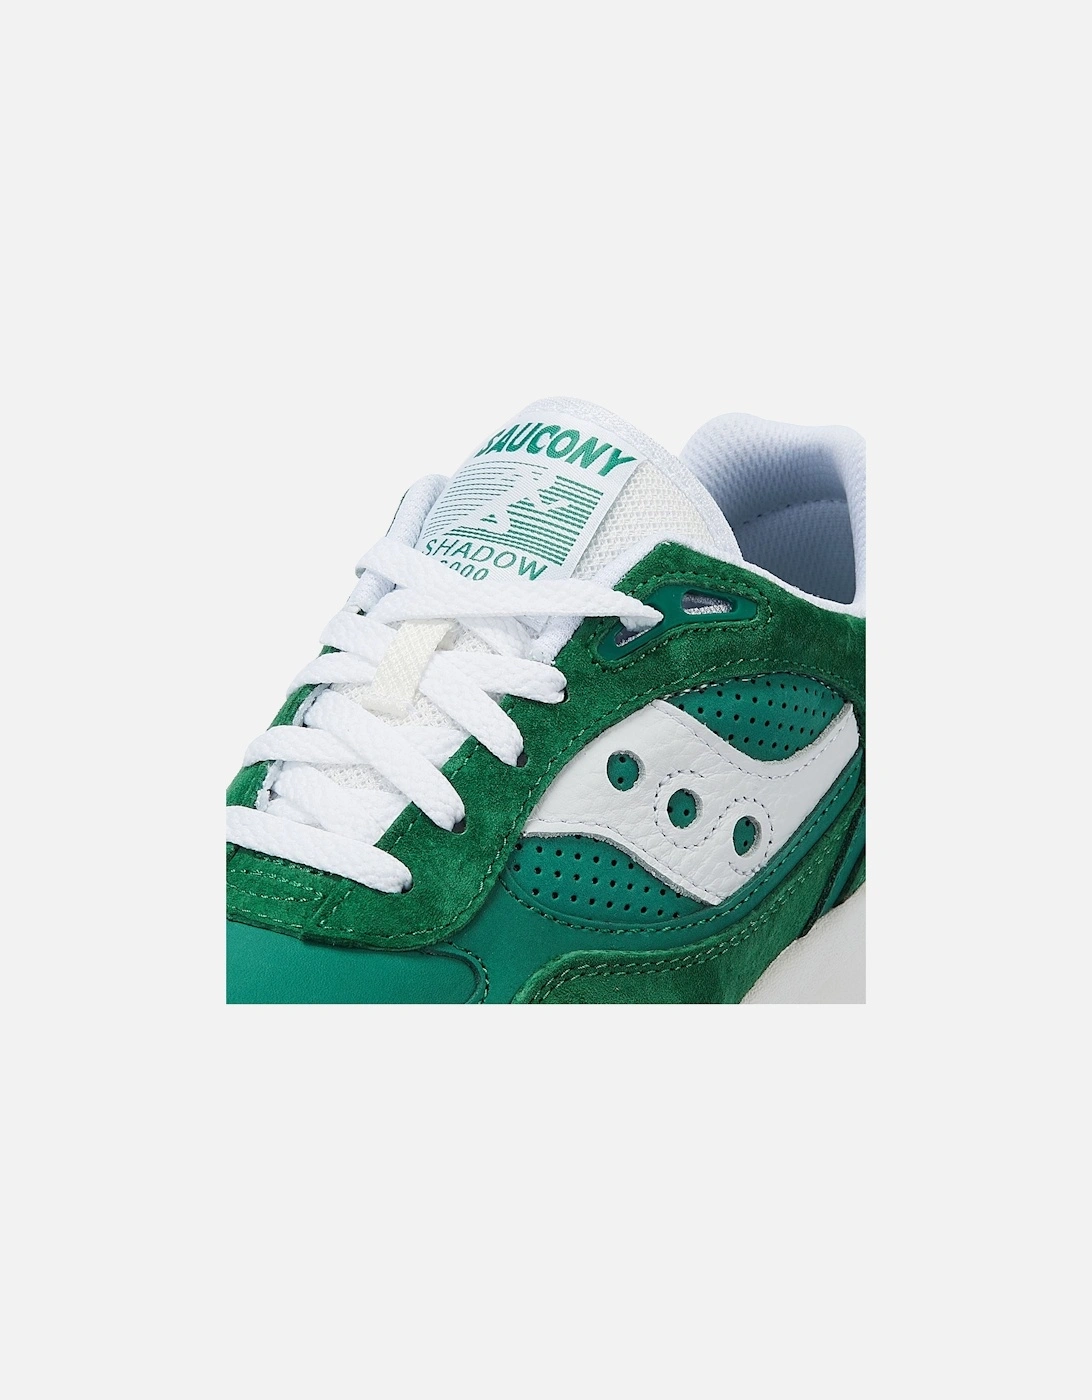 Shadow 6000 Green/White Trainers